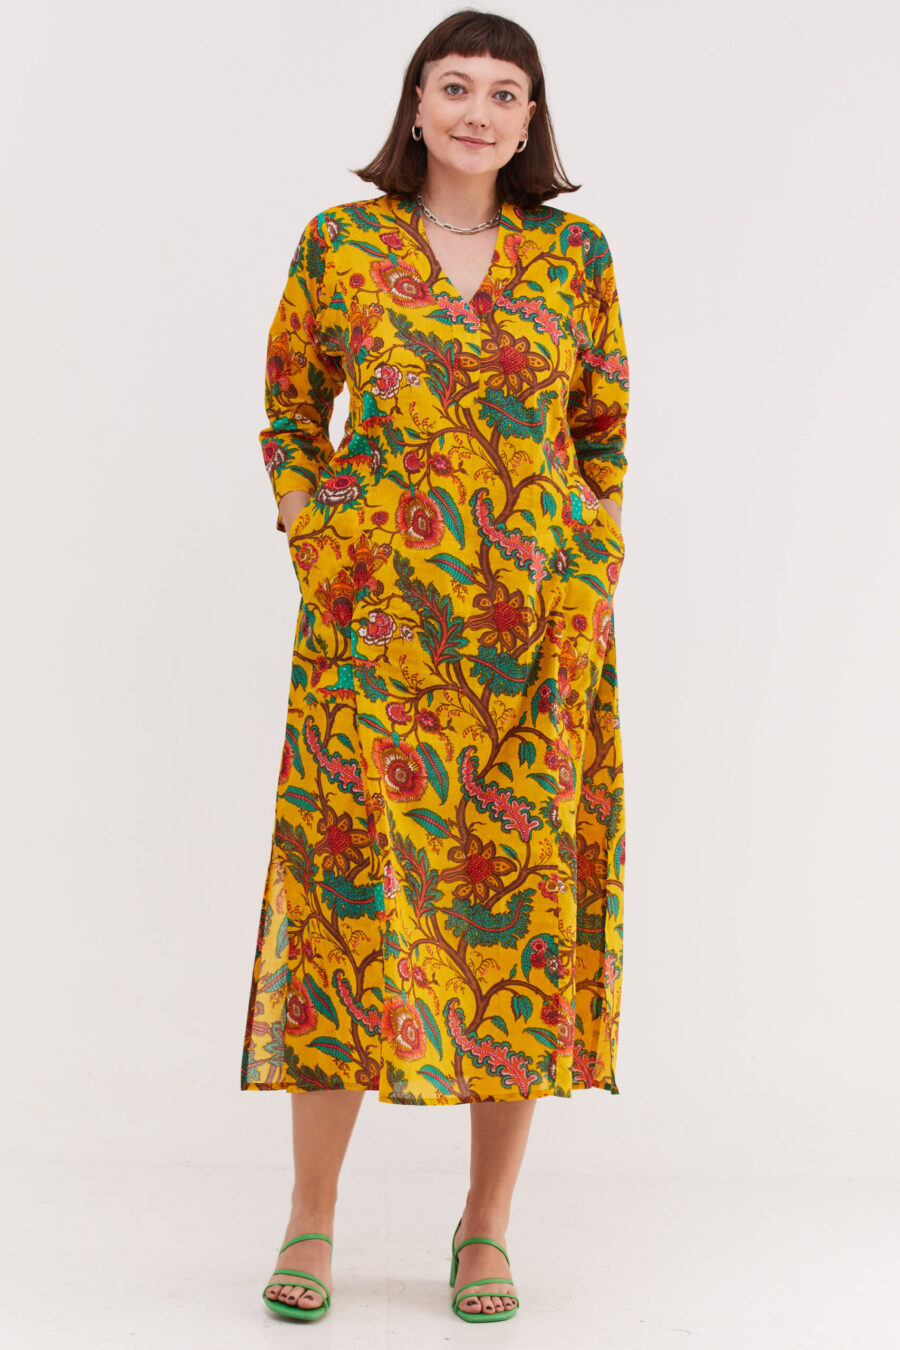 Jalabiya dress | Uniquely designed dress - Yellow flora print, yellow dress with colorful floral print by comfort zone boutique